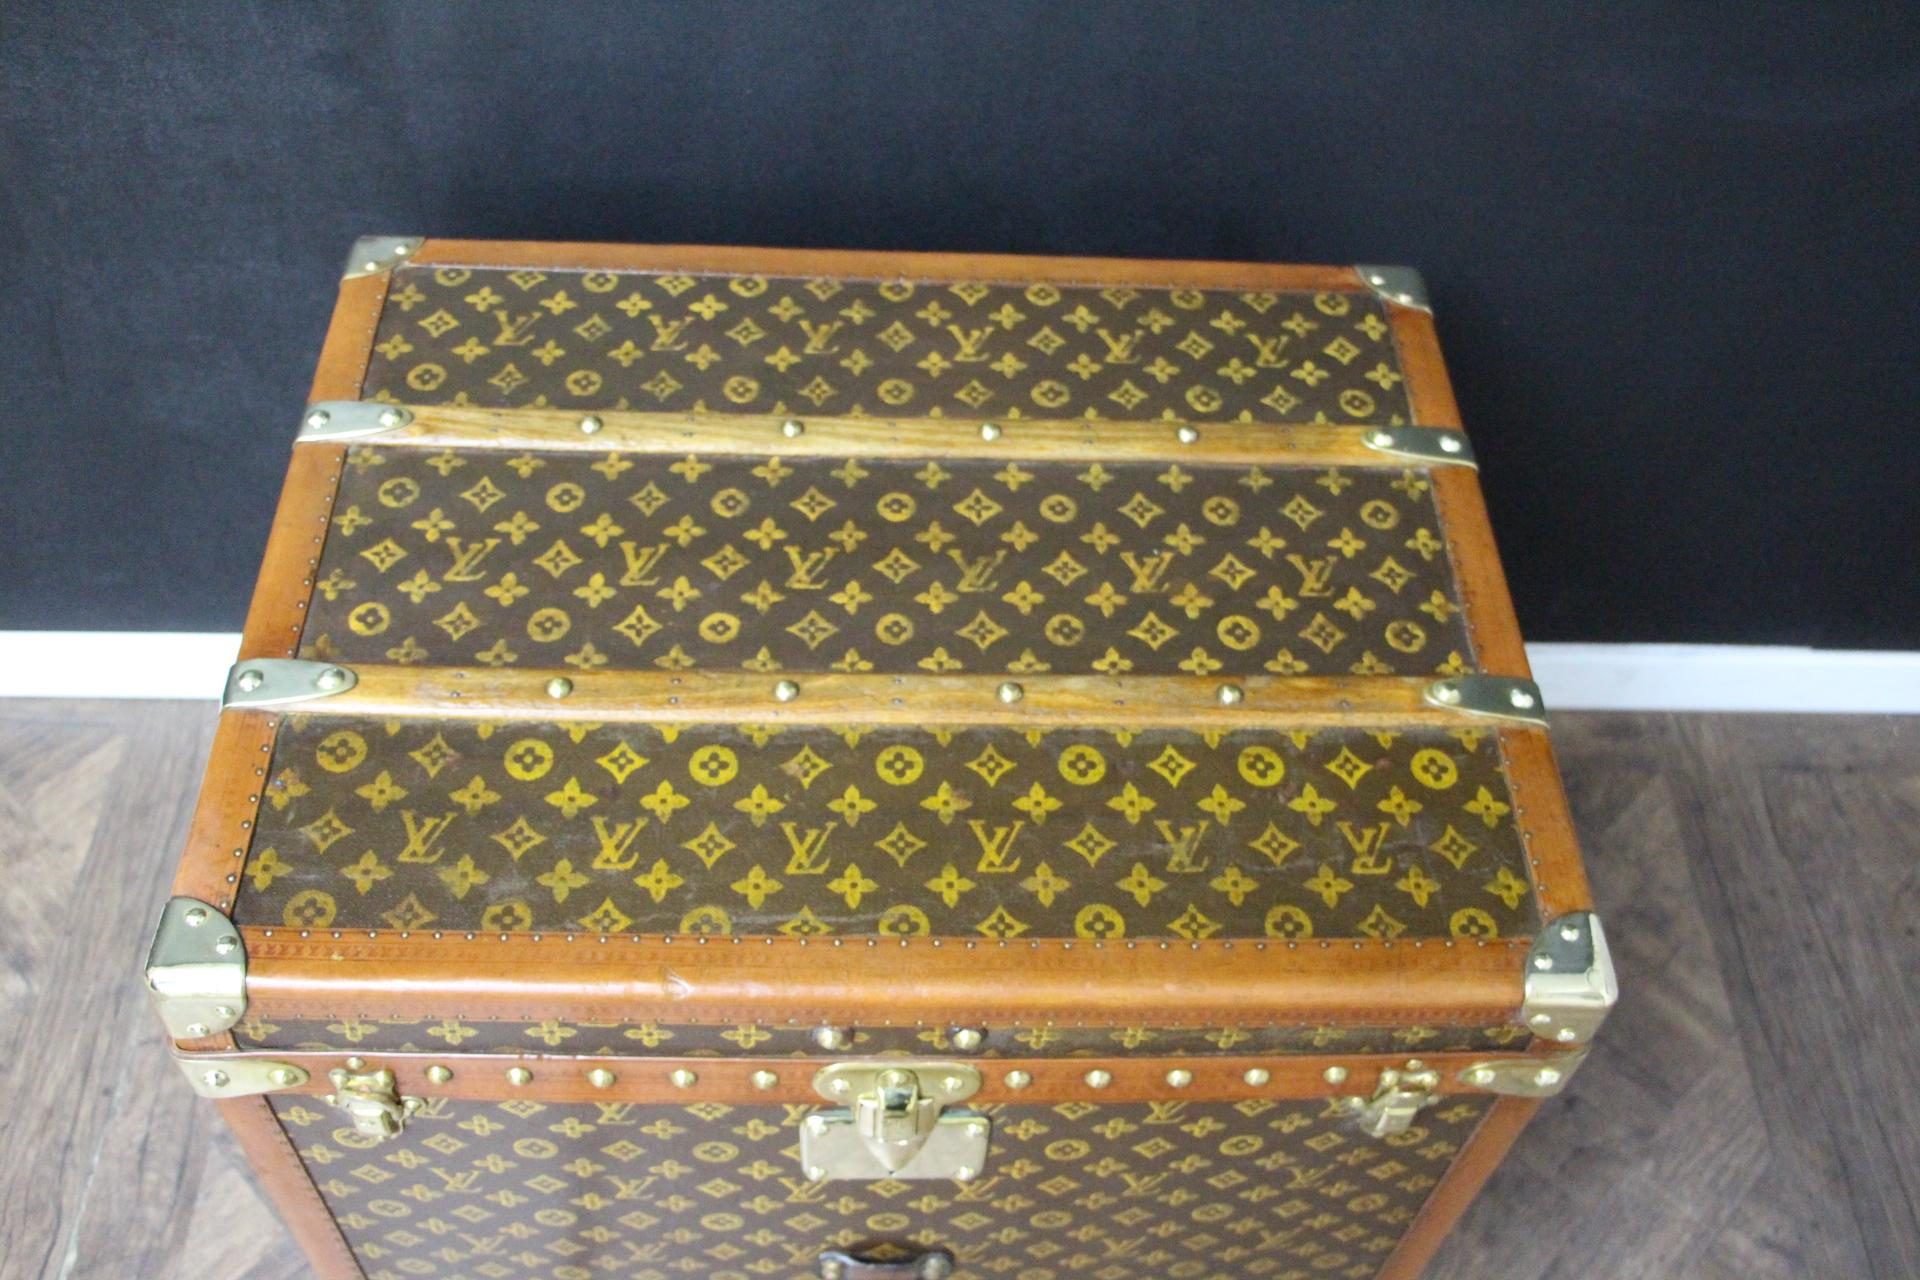 This beautiful and very rare Louis Vuitton trunk features stenciled monogram canvas, honey color lozine trim, large leather side handles, stamped Louis Vuitton brass studs, lock and clasps. Its patina is magnificent. Moreover it has a very sought